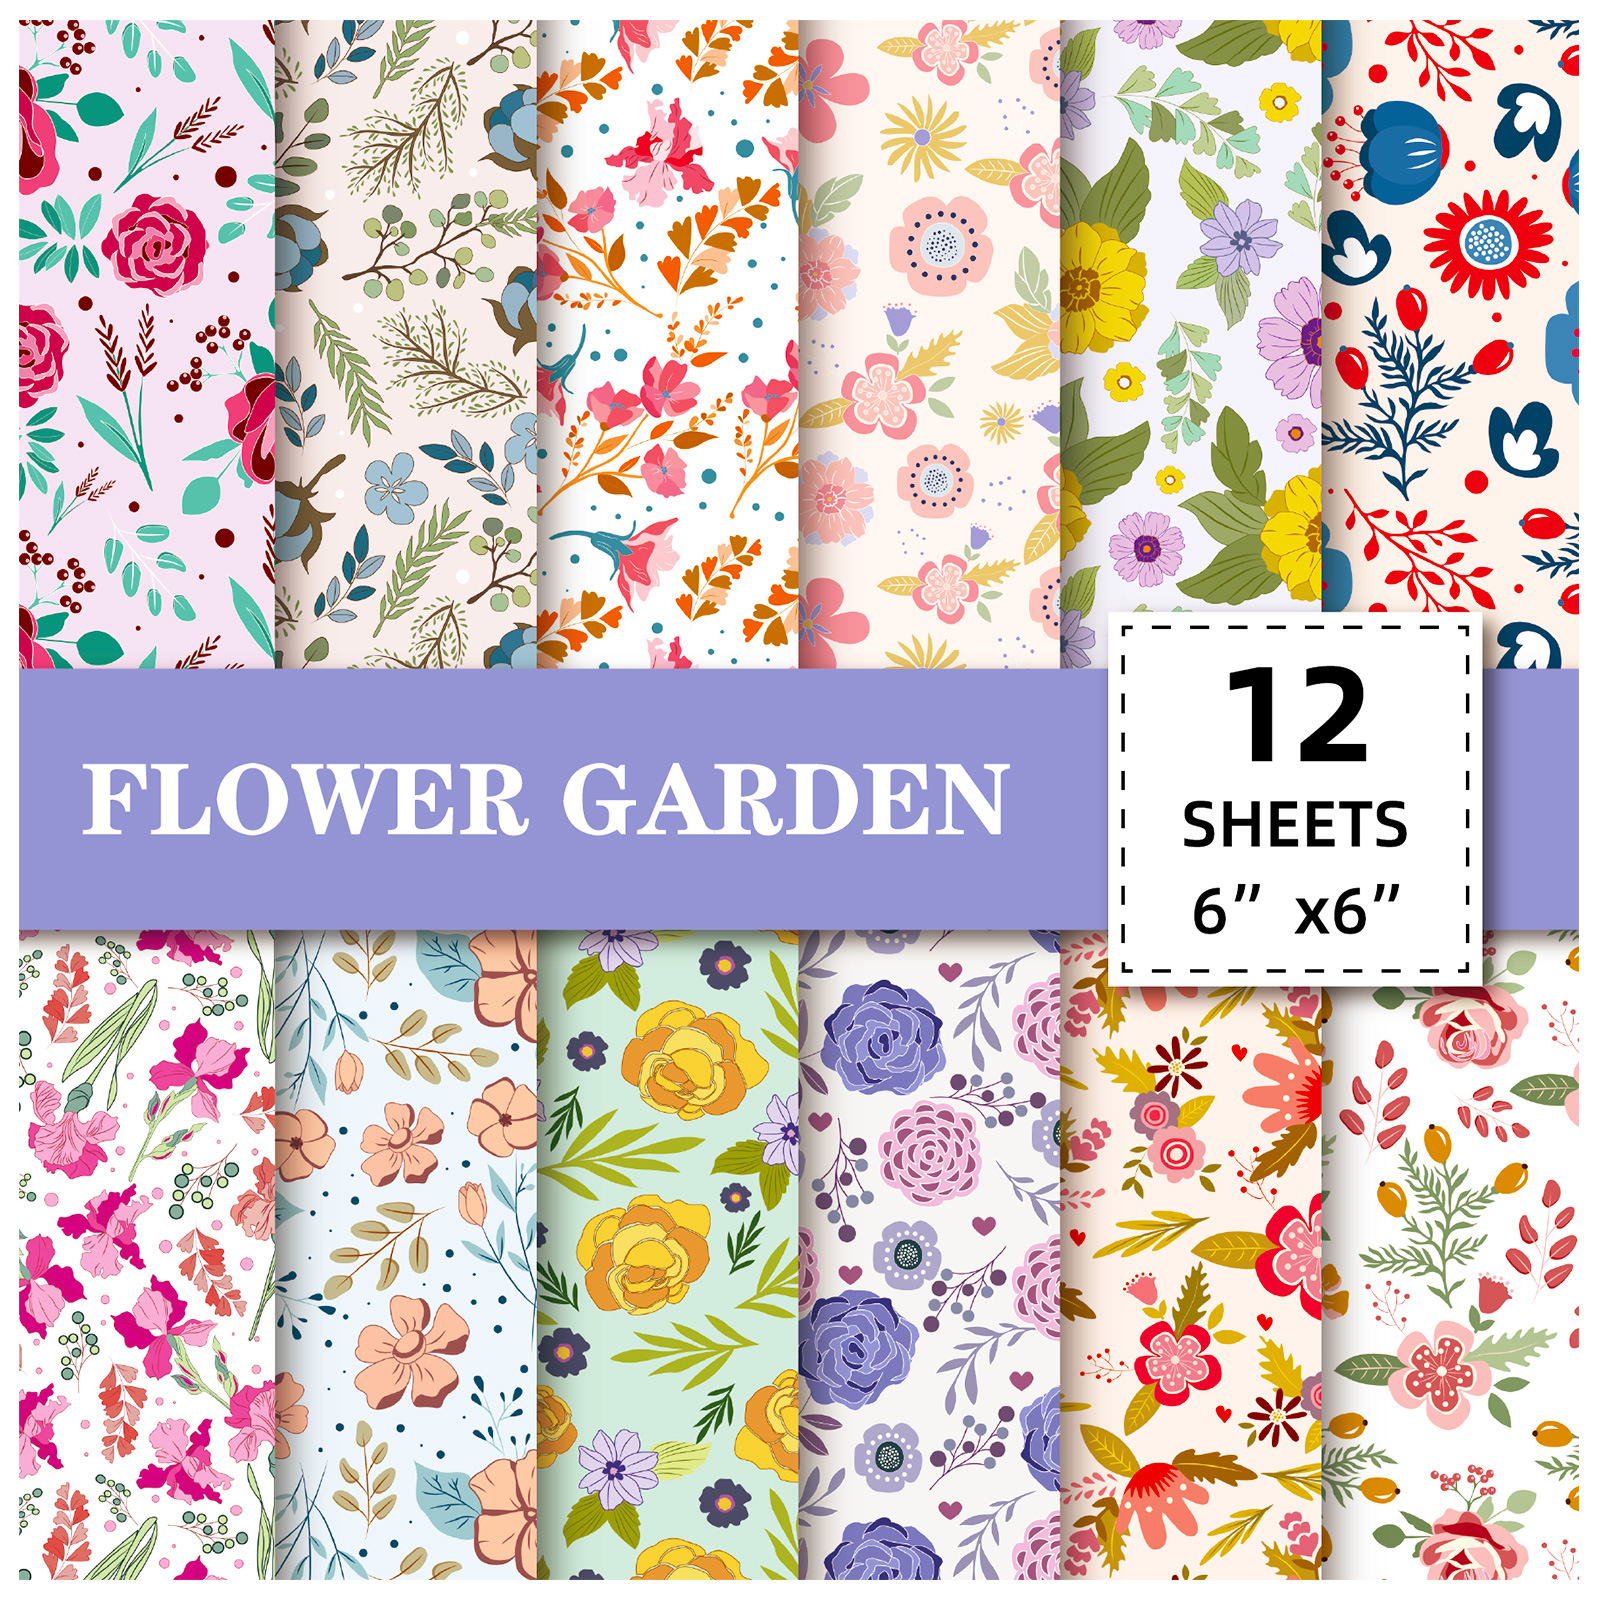 Floral Mix & Match Paper Pack for DIY Crafts - 12 Sheets,  Perfect for Scrapbooking & Journals